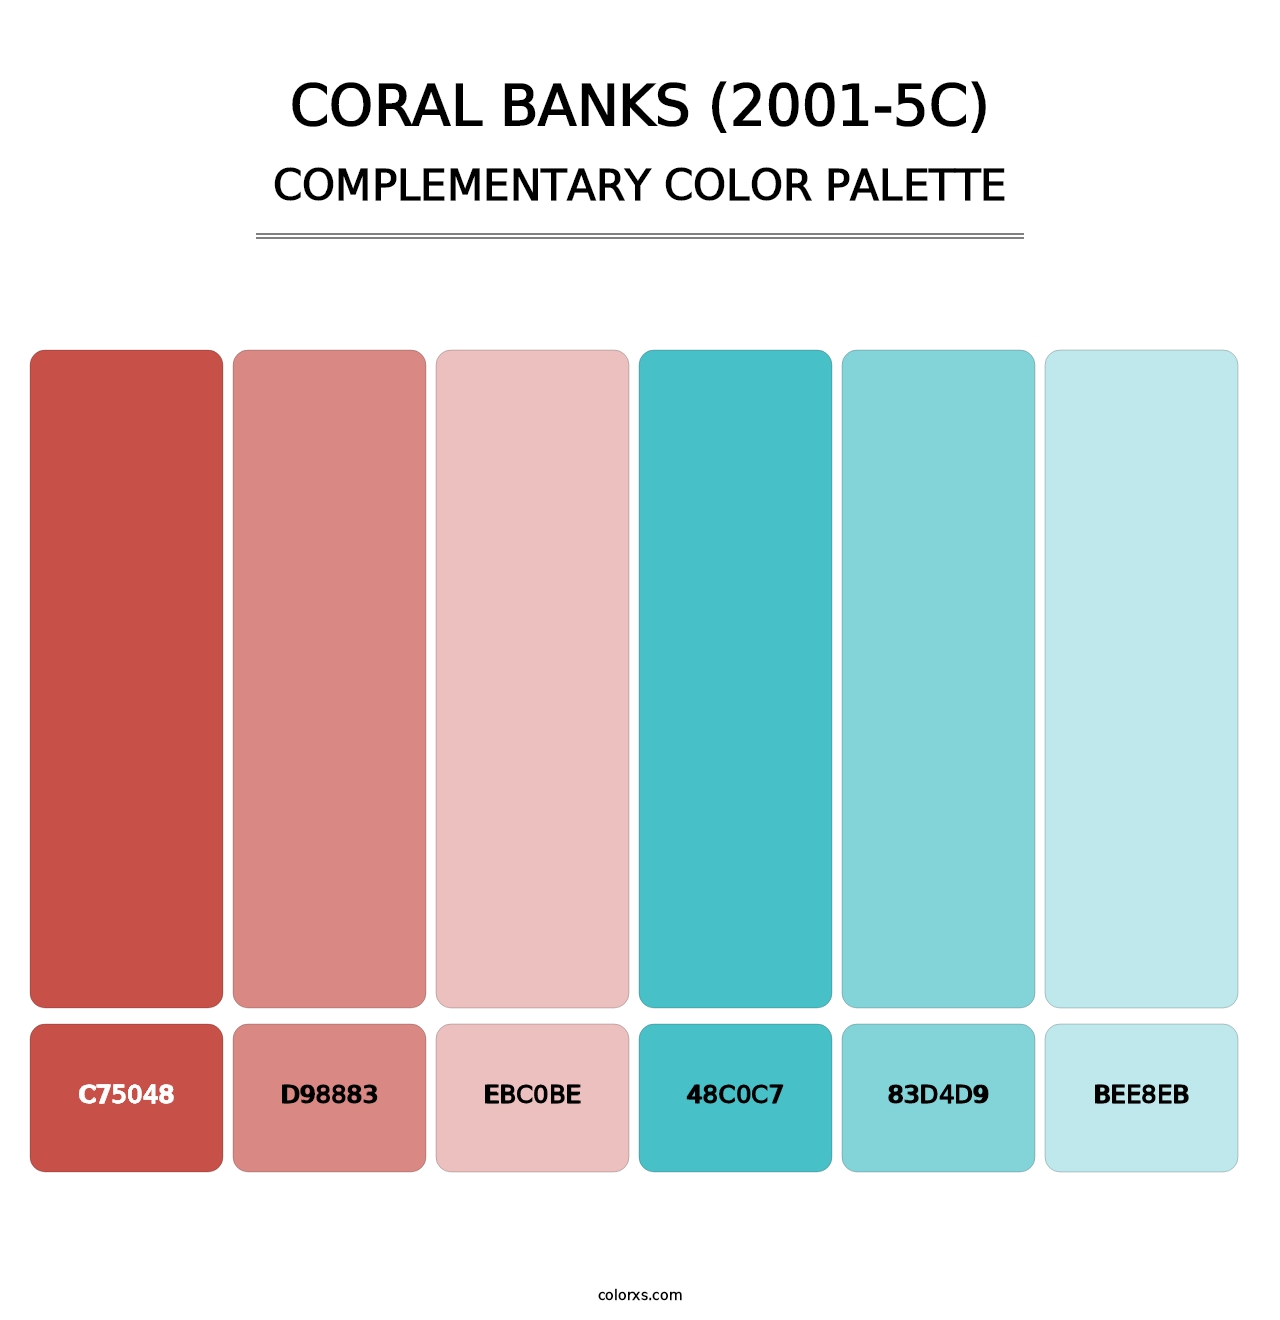 Coral Banks (2001-5C) - Complementary Color Palette